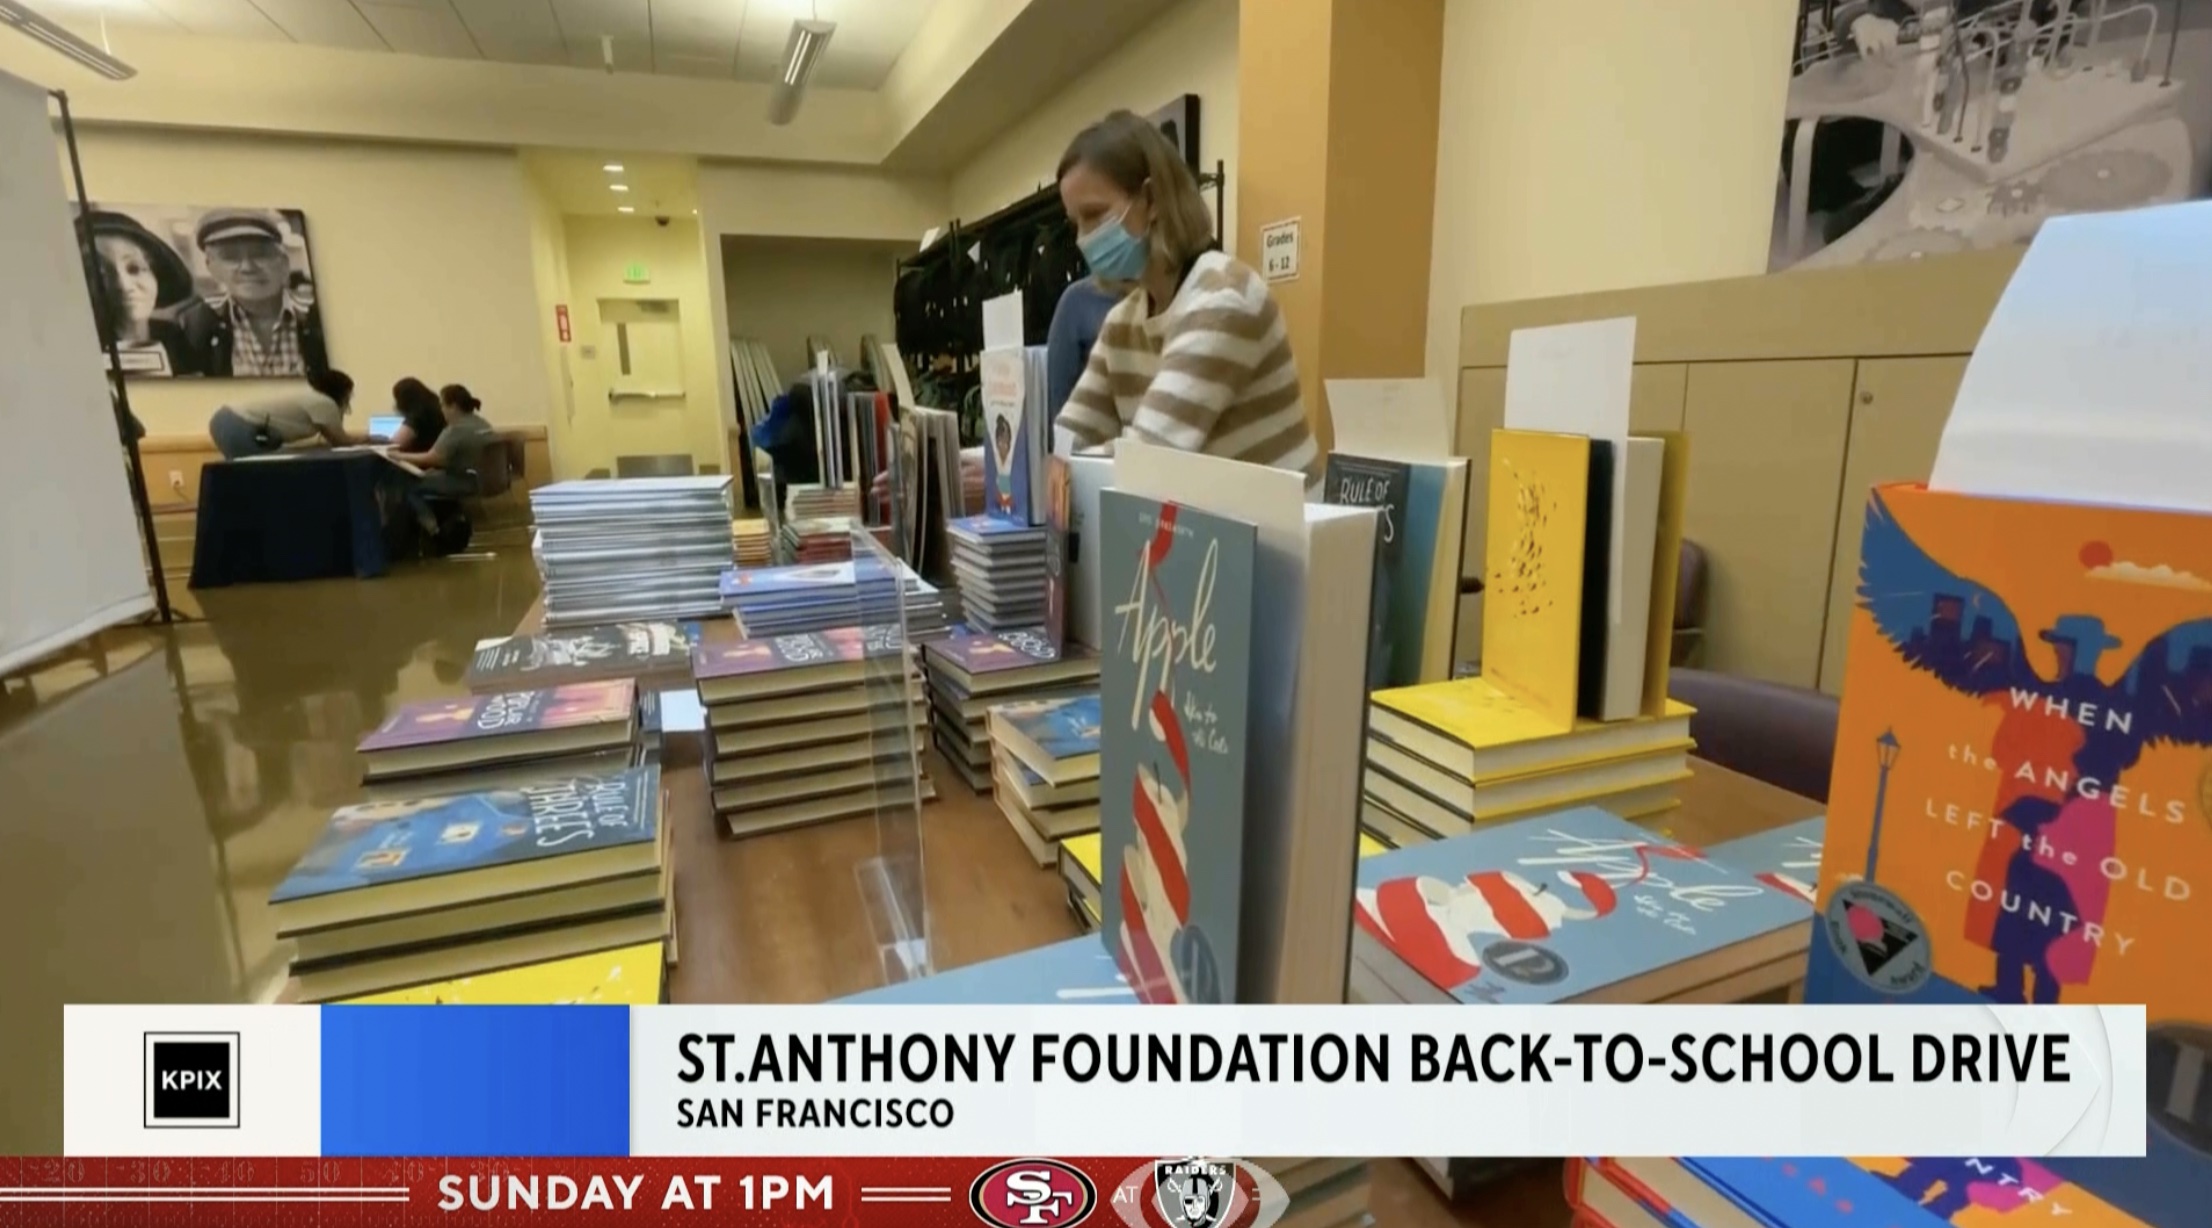 CBS News Bay Area: Back-to-school giveaway at St. Anthony’s